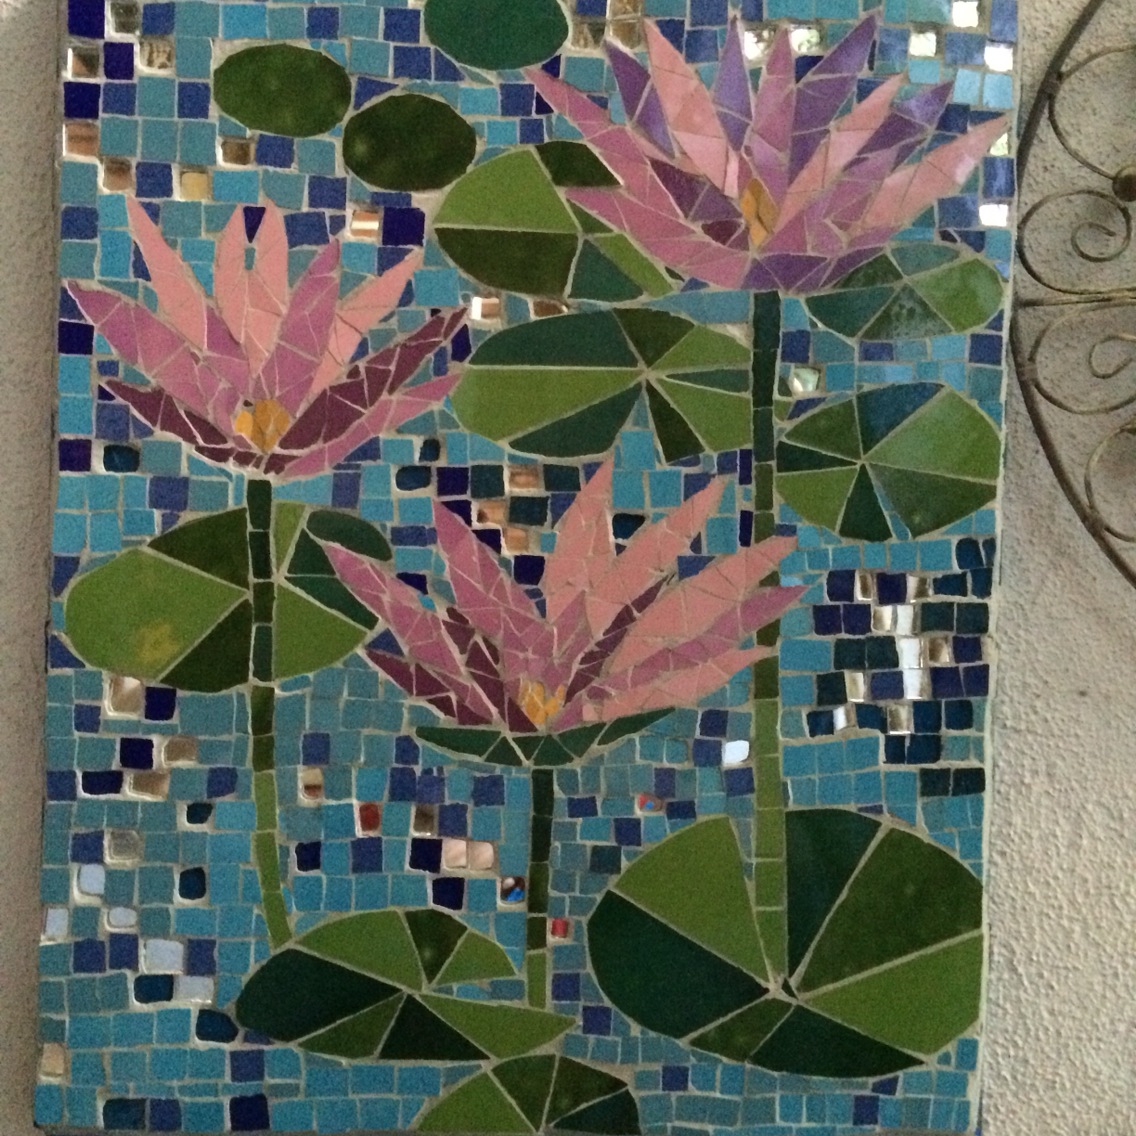 Mosaic Art as a Unique and Interesting Decoration for Your Interior